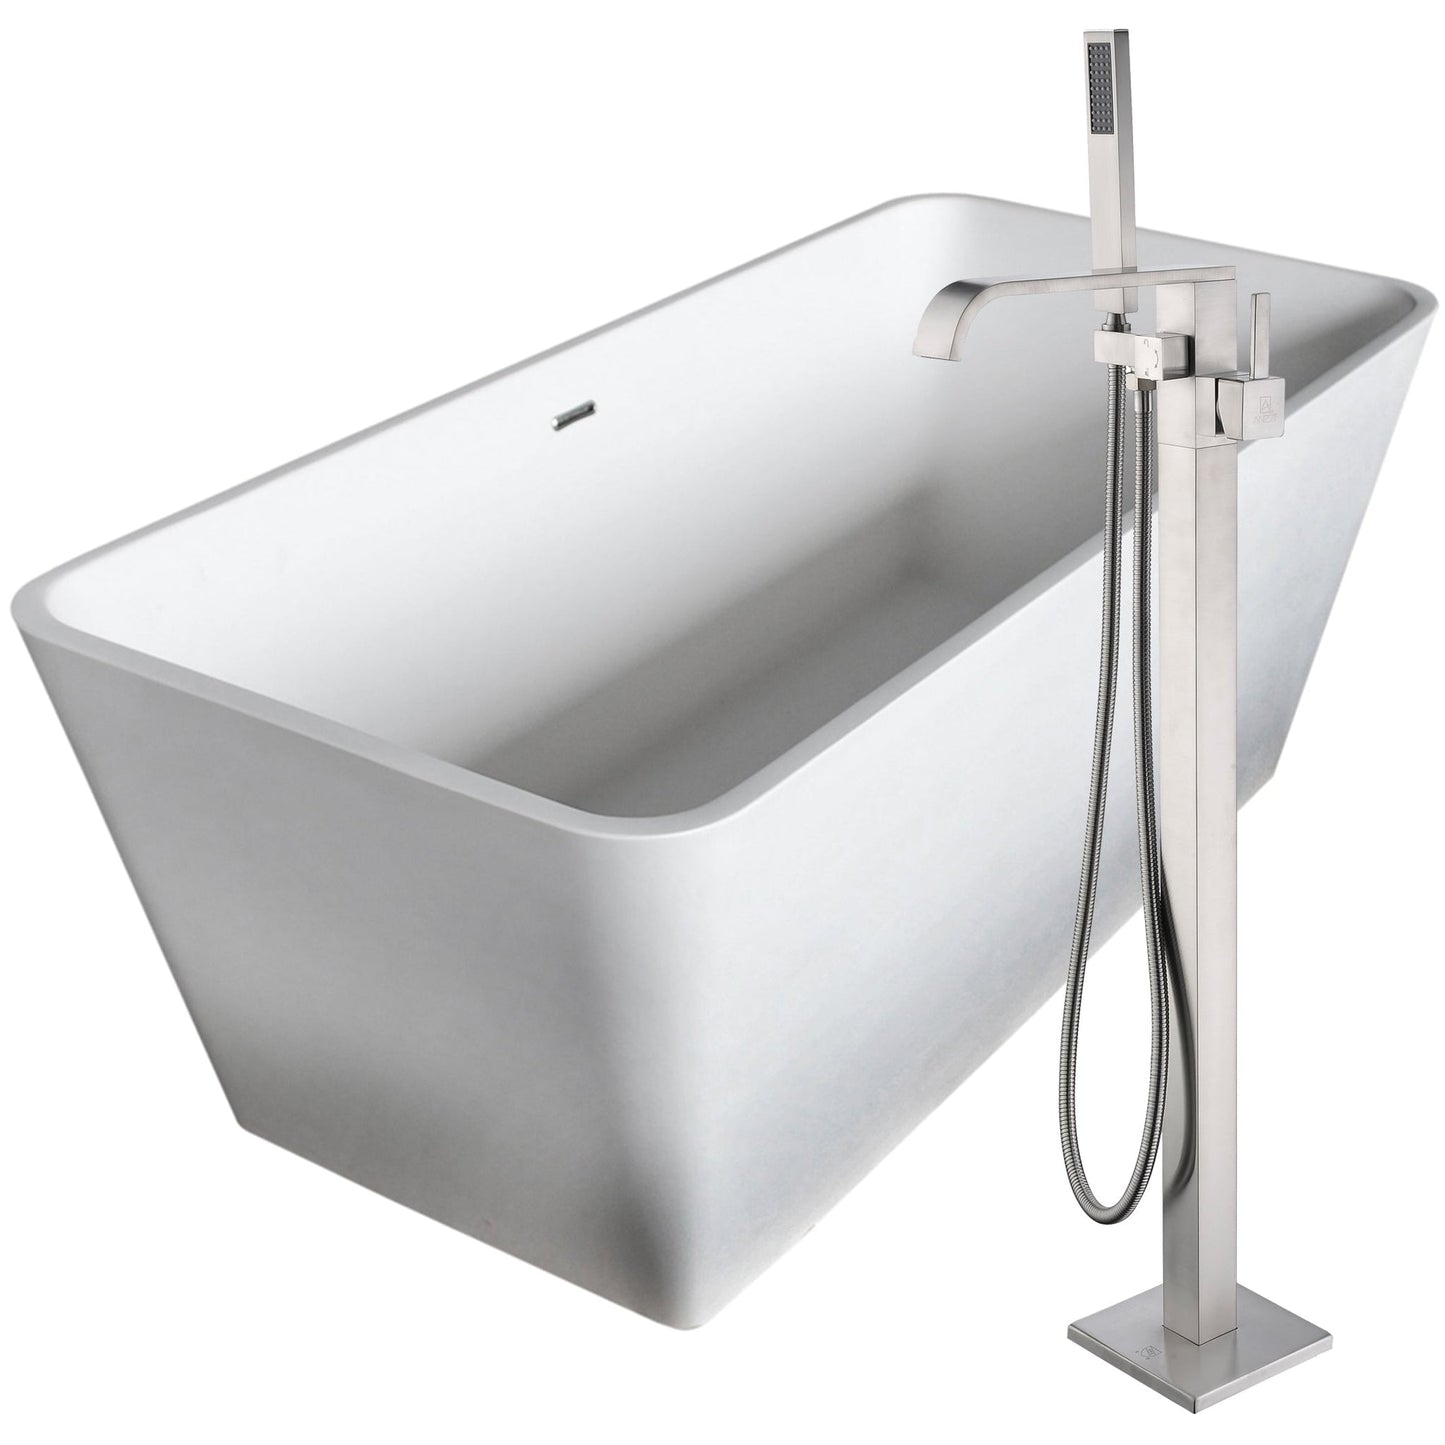 ANZZI Cenere Series 60" x 27" Freestanding Matte White Bathtub With Built-In Overflow, Pop Up Drain and Angel Bathtub Faucet